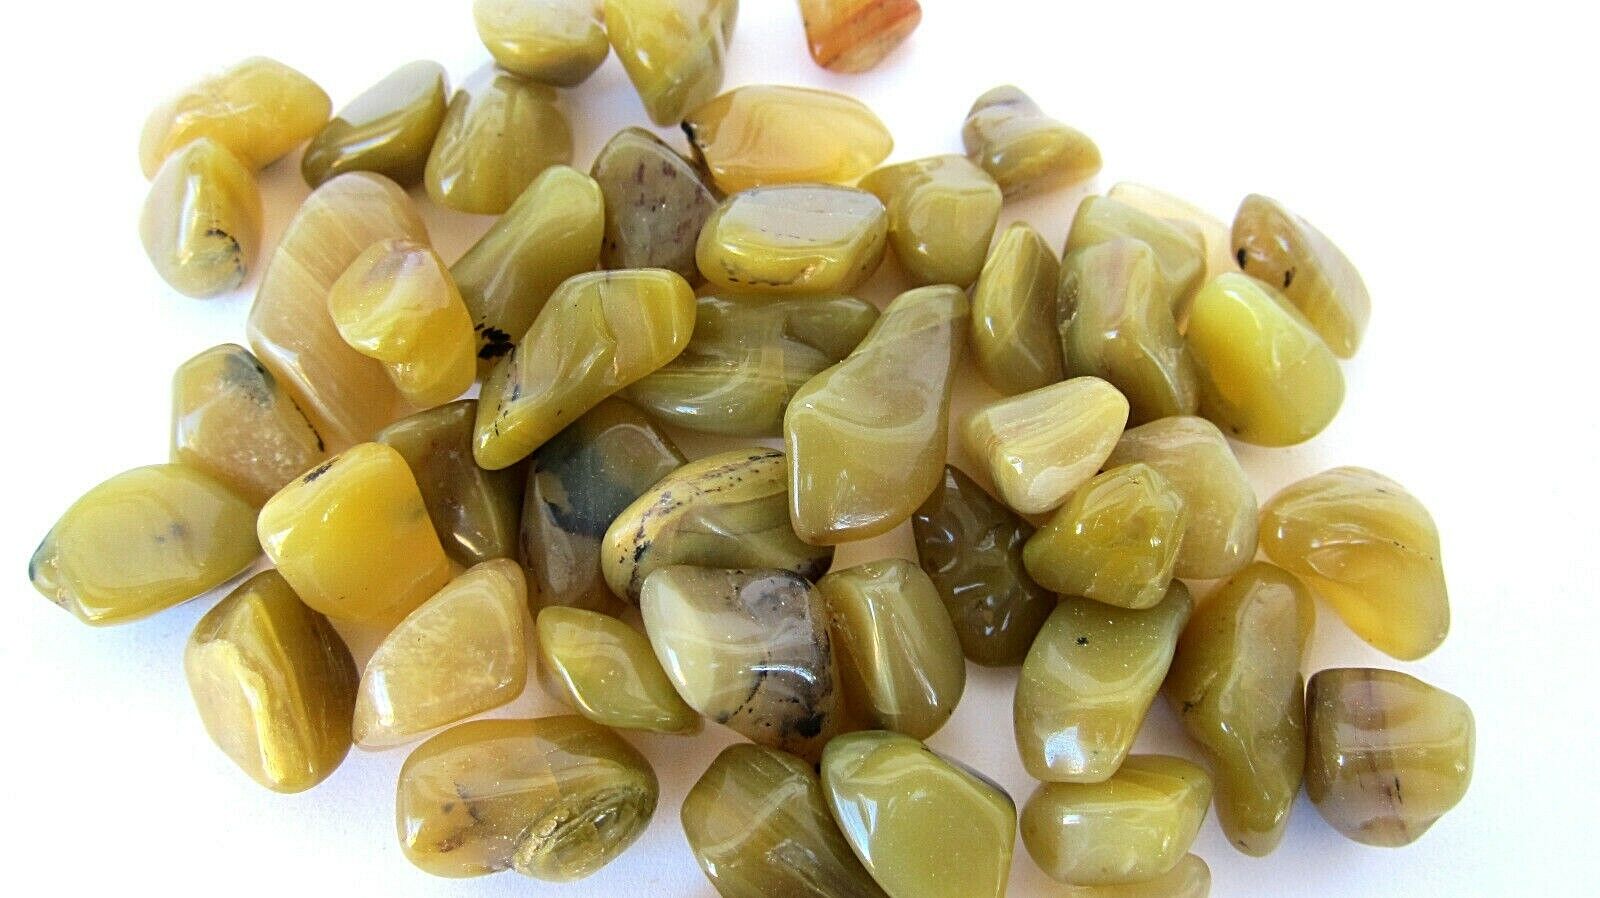 Six Olive Green Opal Tumbled Stone 10-20mm Healing Crystal Relaxation Finances